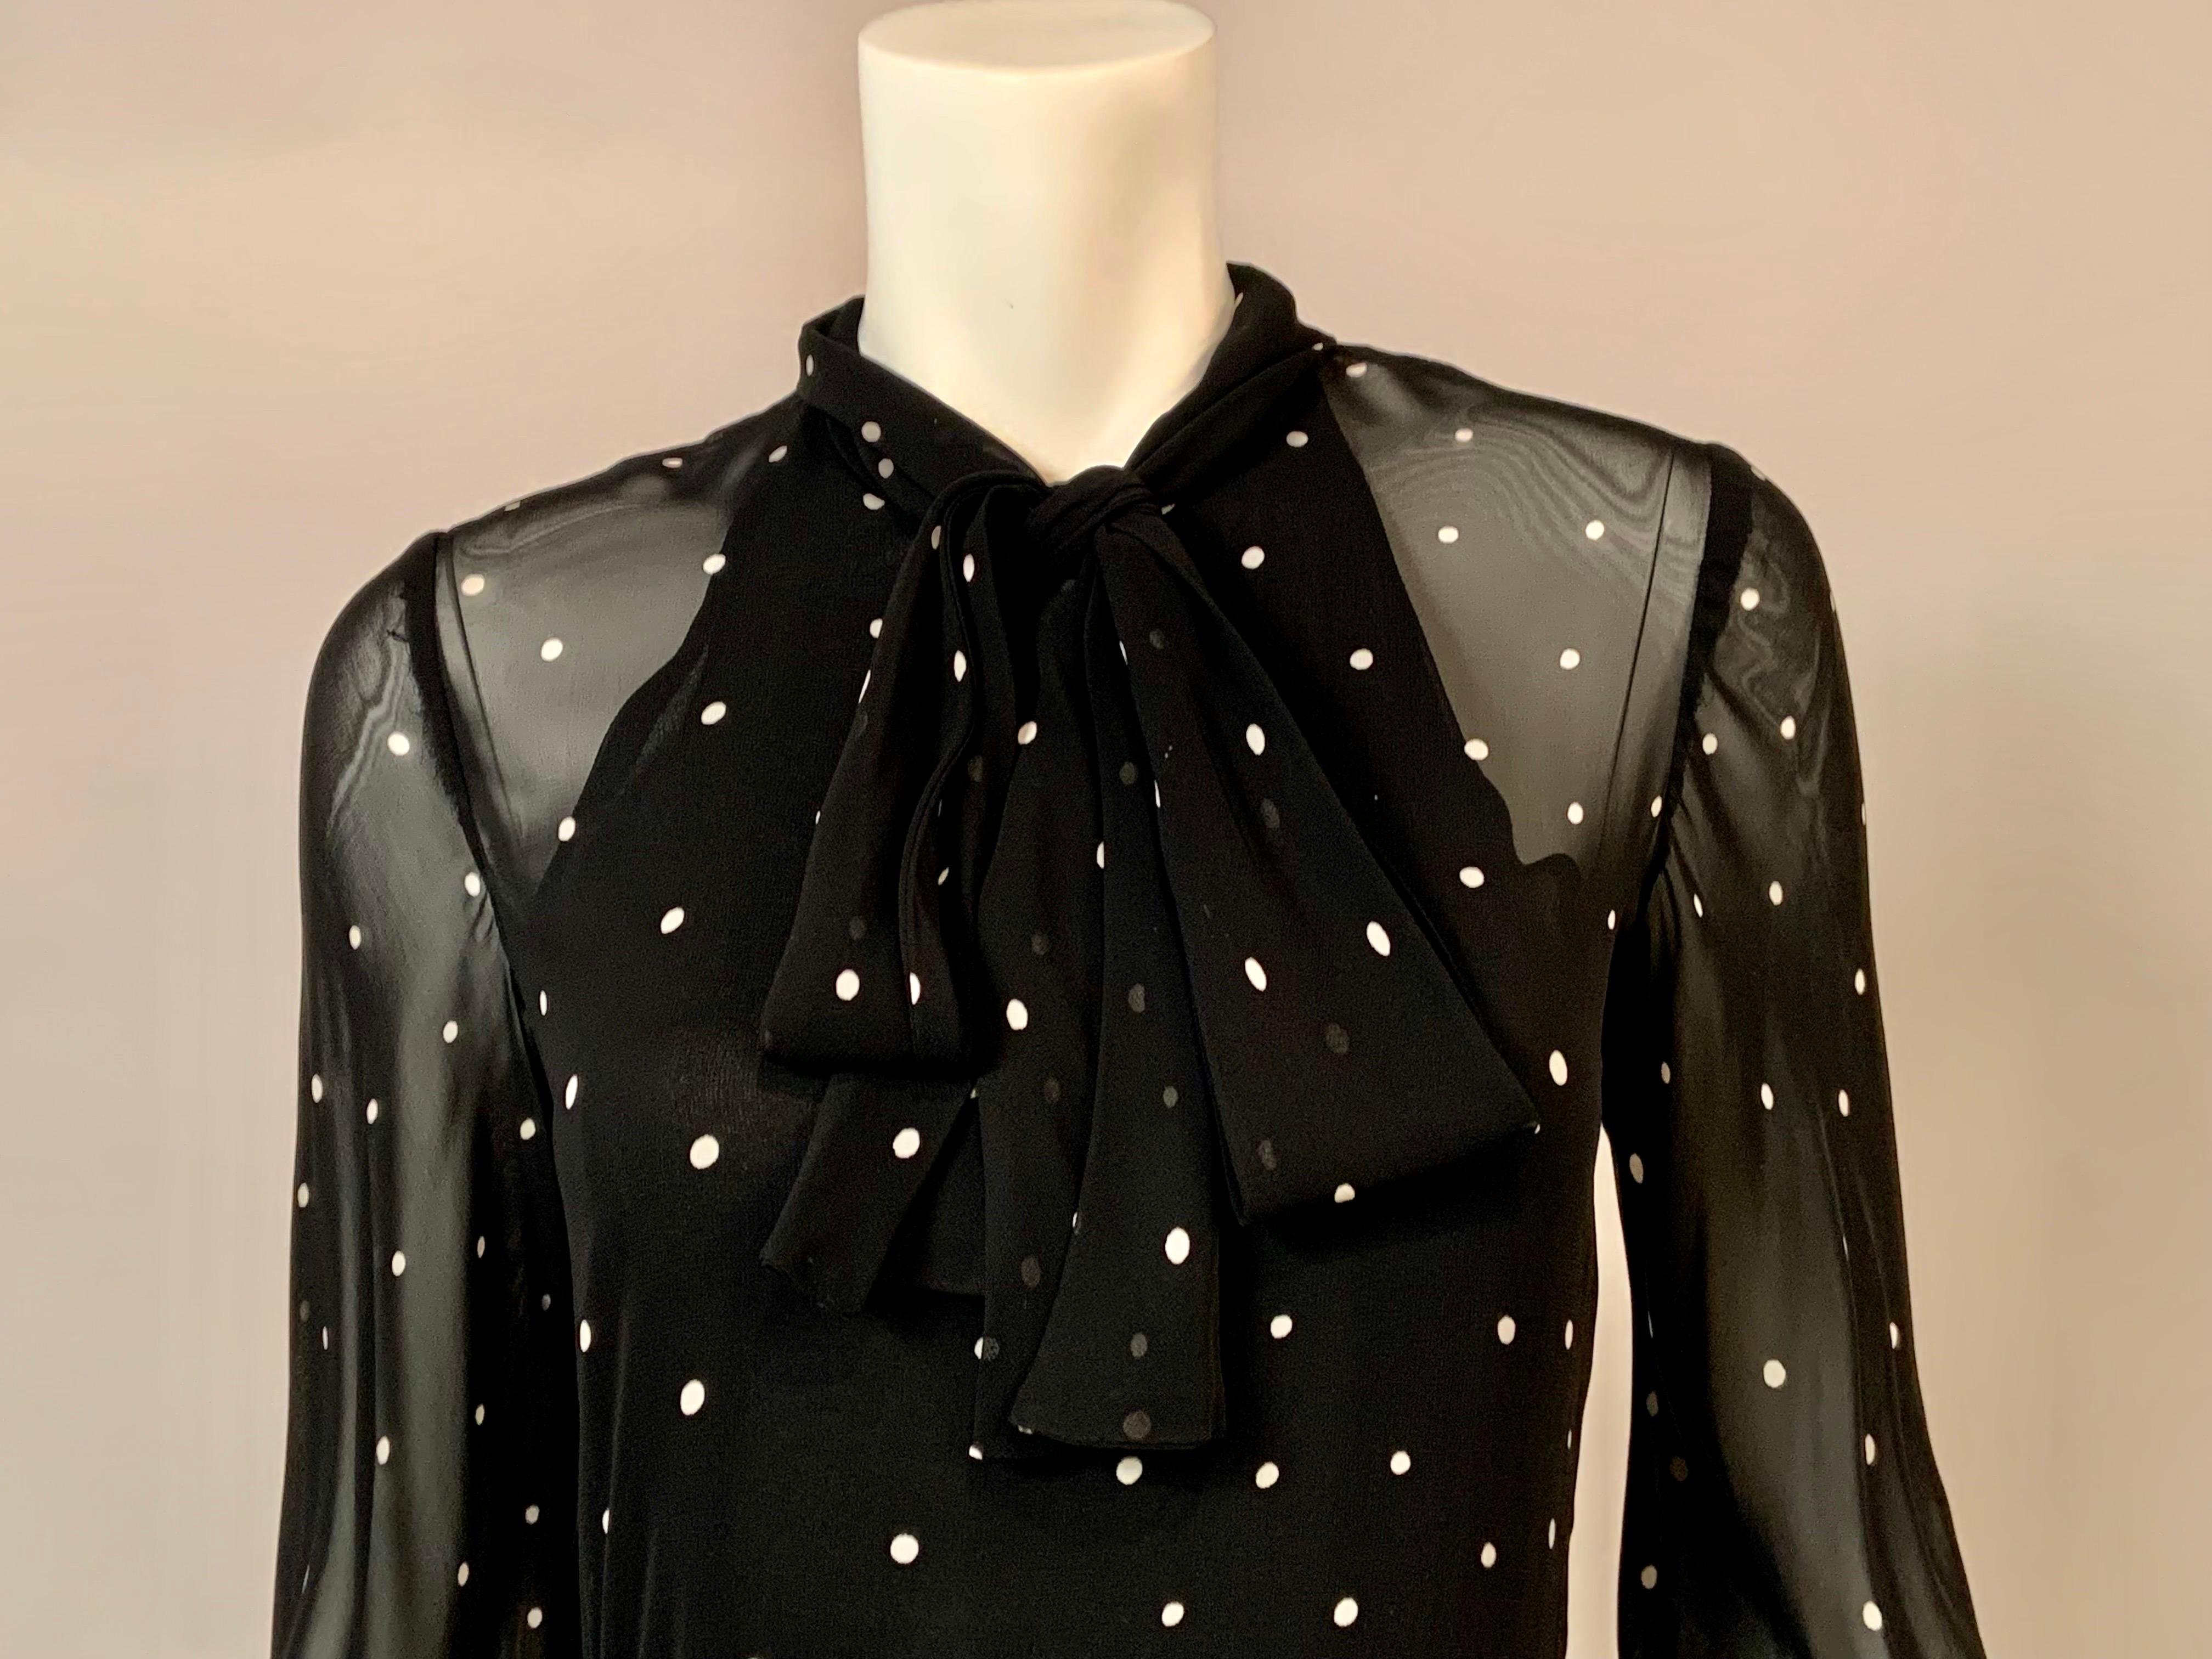 This is such a fun maxi dress from the 1970's.  The top black chiffon with white polka dots. It has a high neckline with a pussy cat bow and long sleeves with a button cuff.  The skirt is a coordinating print with white polka dots and a floral